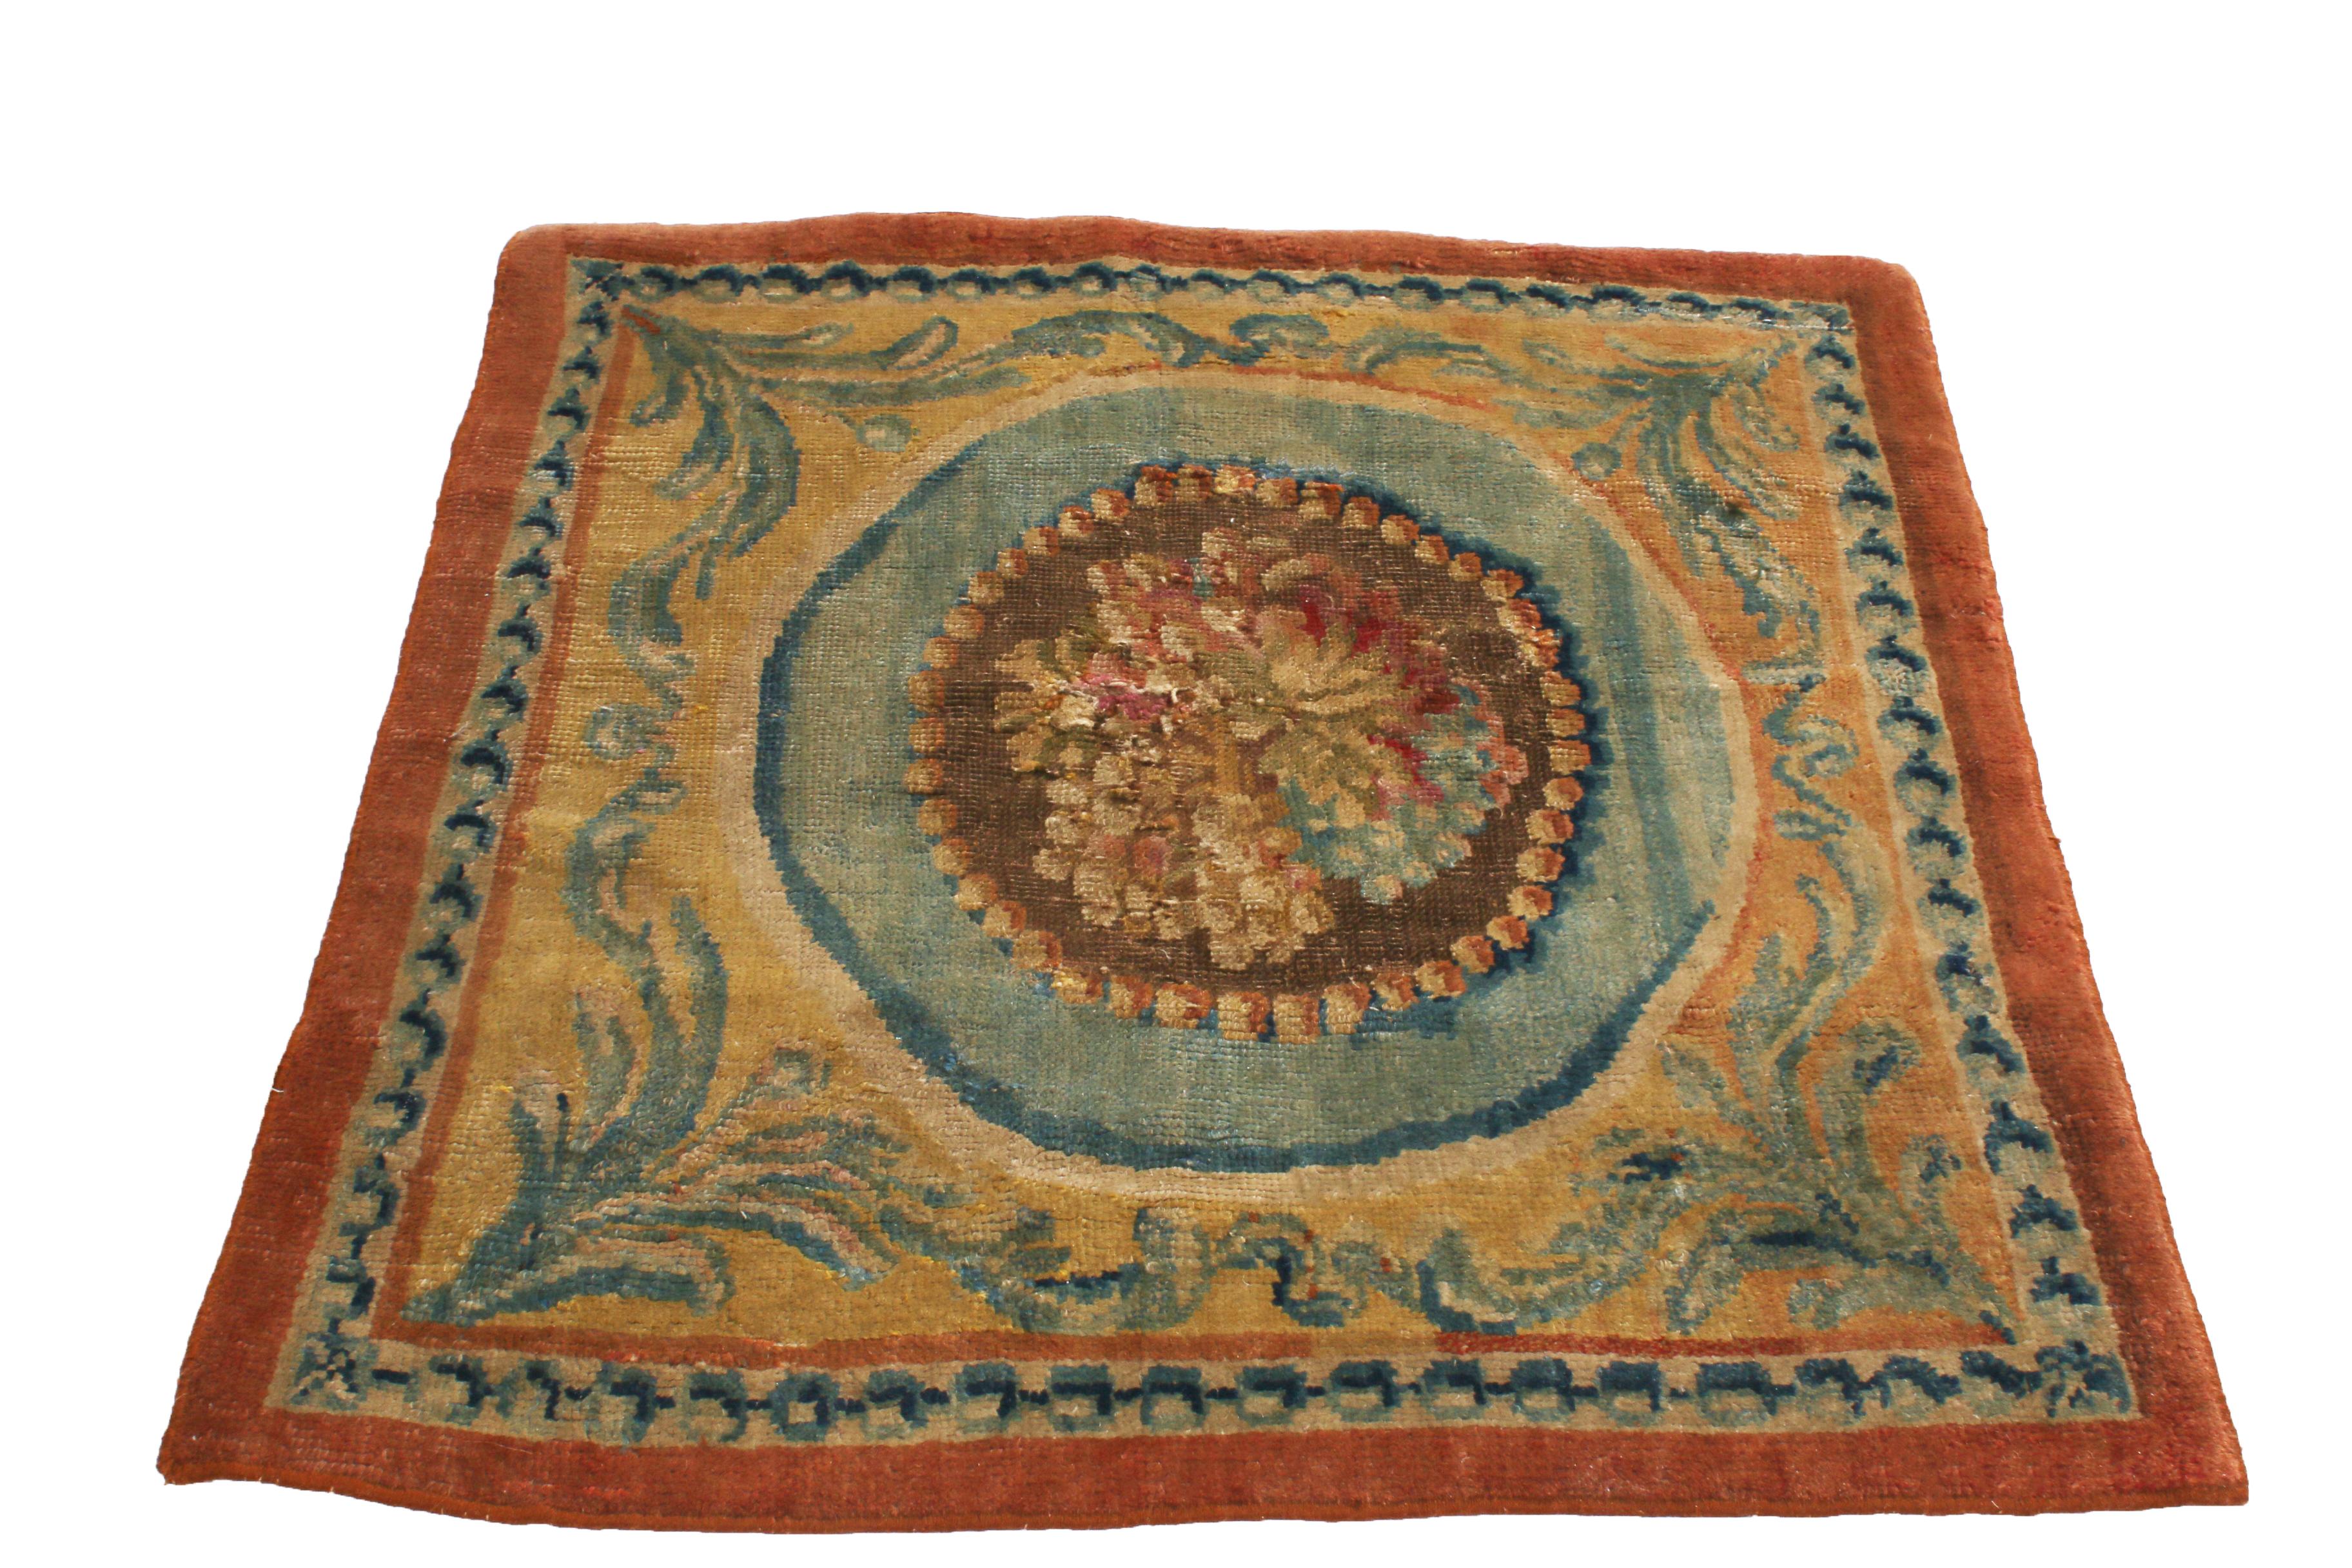 Originating from France in 1910, this antique Savonniere rug was hand knotted with wool pile hailing from one of the most widely regarded European rug manufacturers for multiple centuries, often paralleling the most treasured Aubusson pieces of each